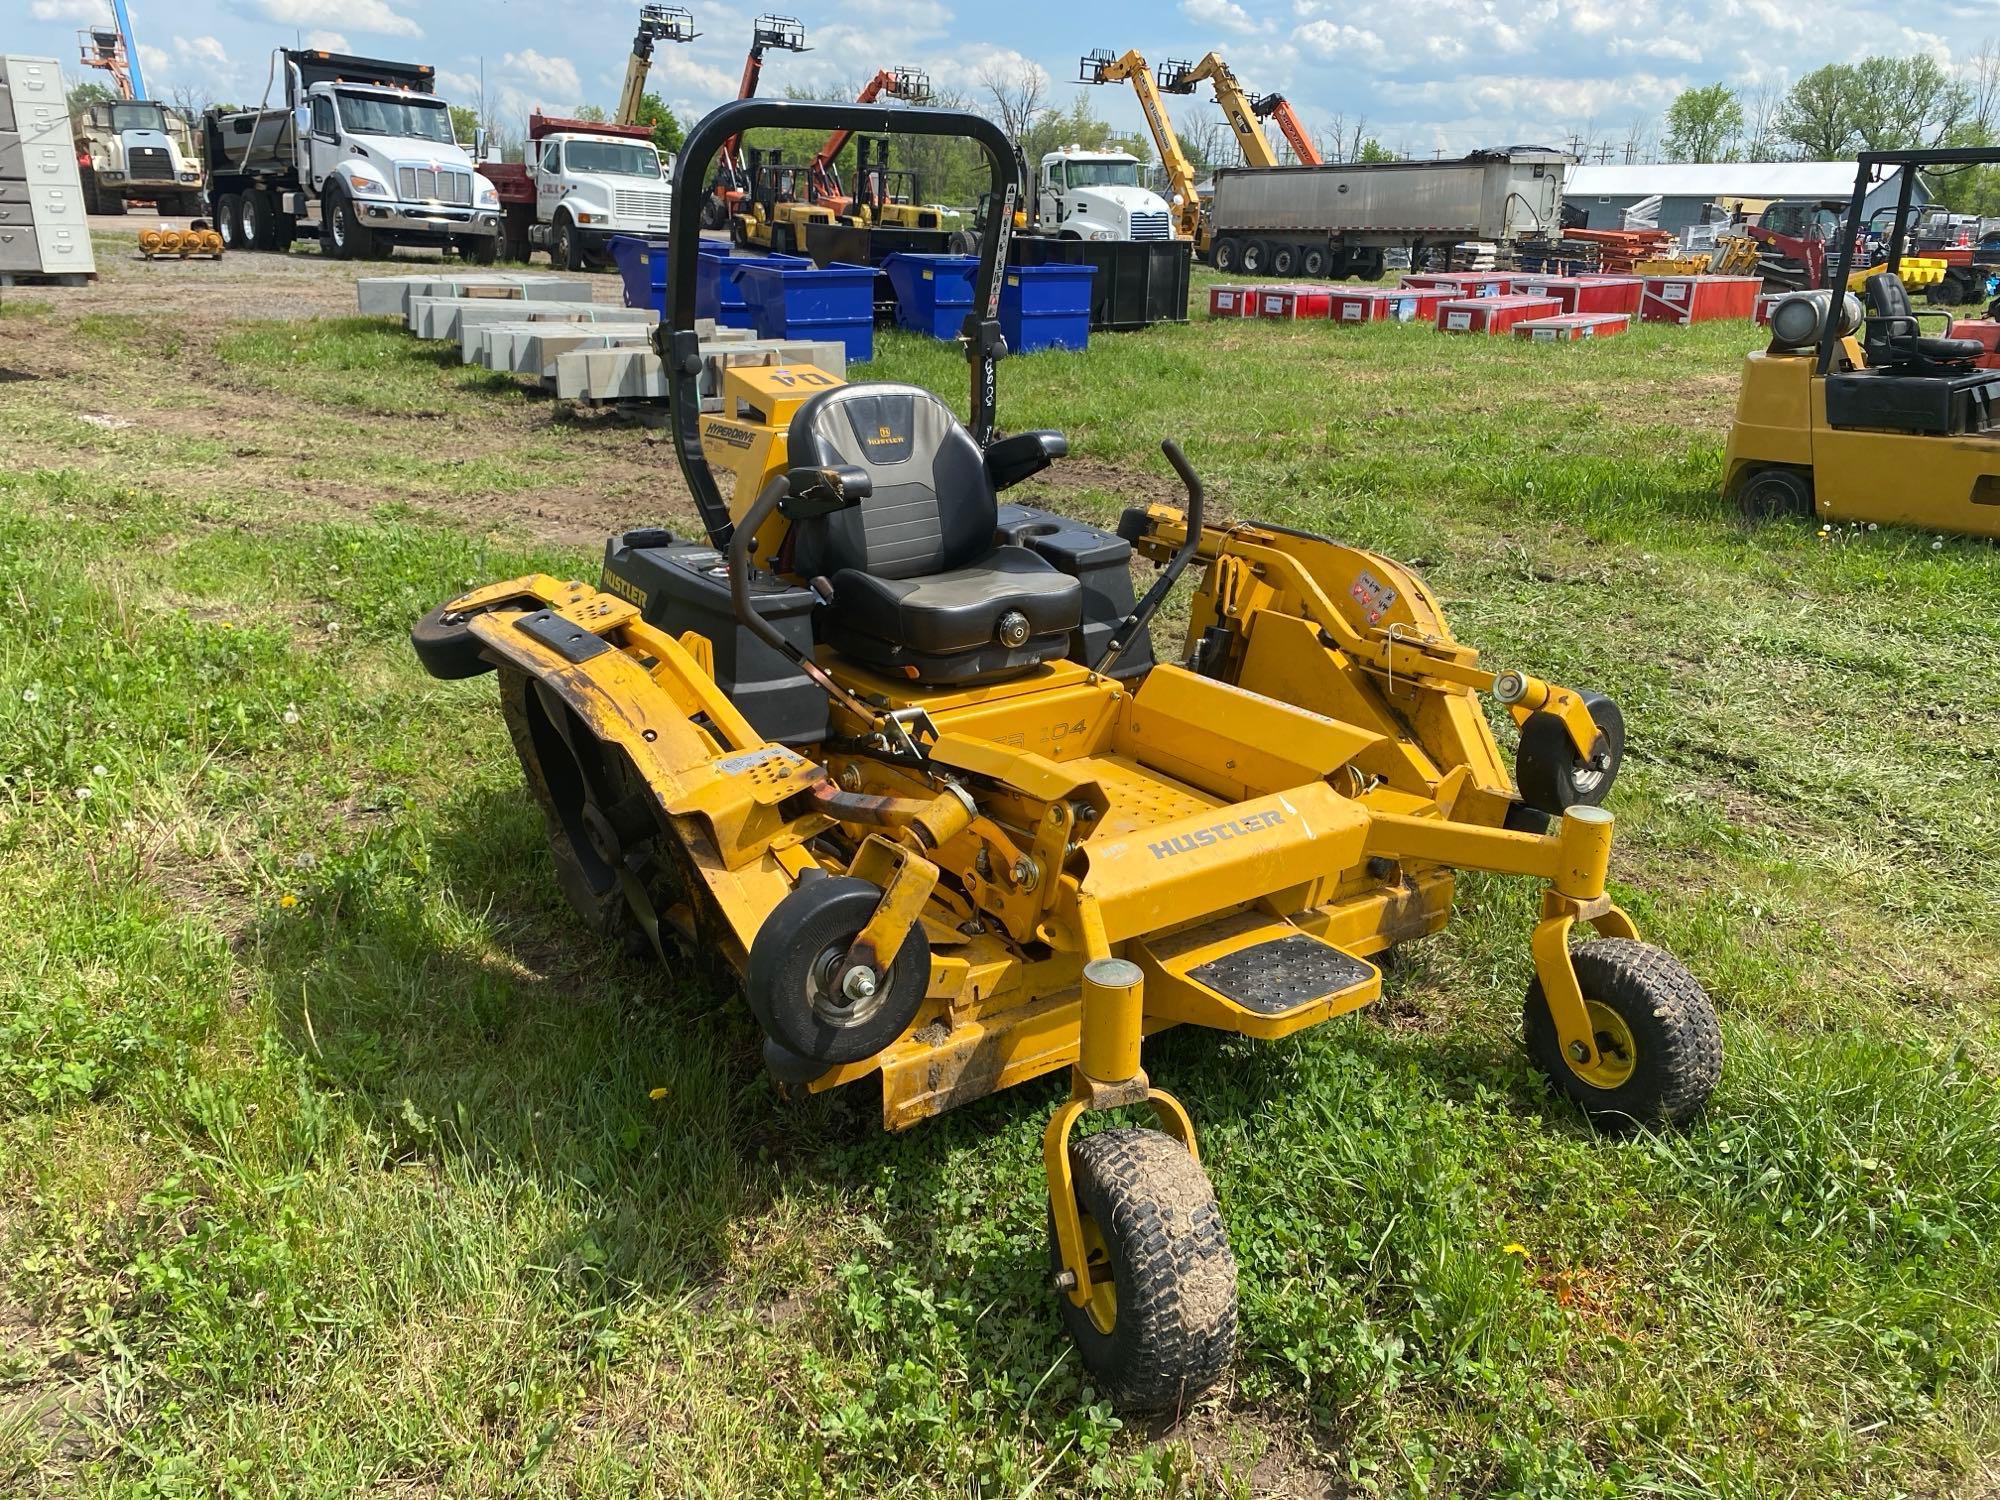 HUSTLER SUPER 104 COMMERCIAL MOWER SN:20030910 powered by Kawasaki gas engine, equipped with ROPS,